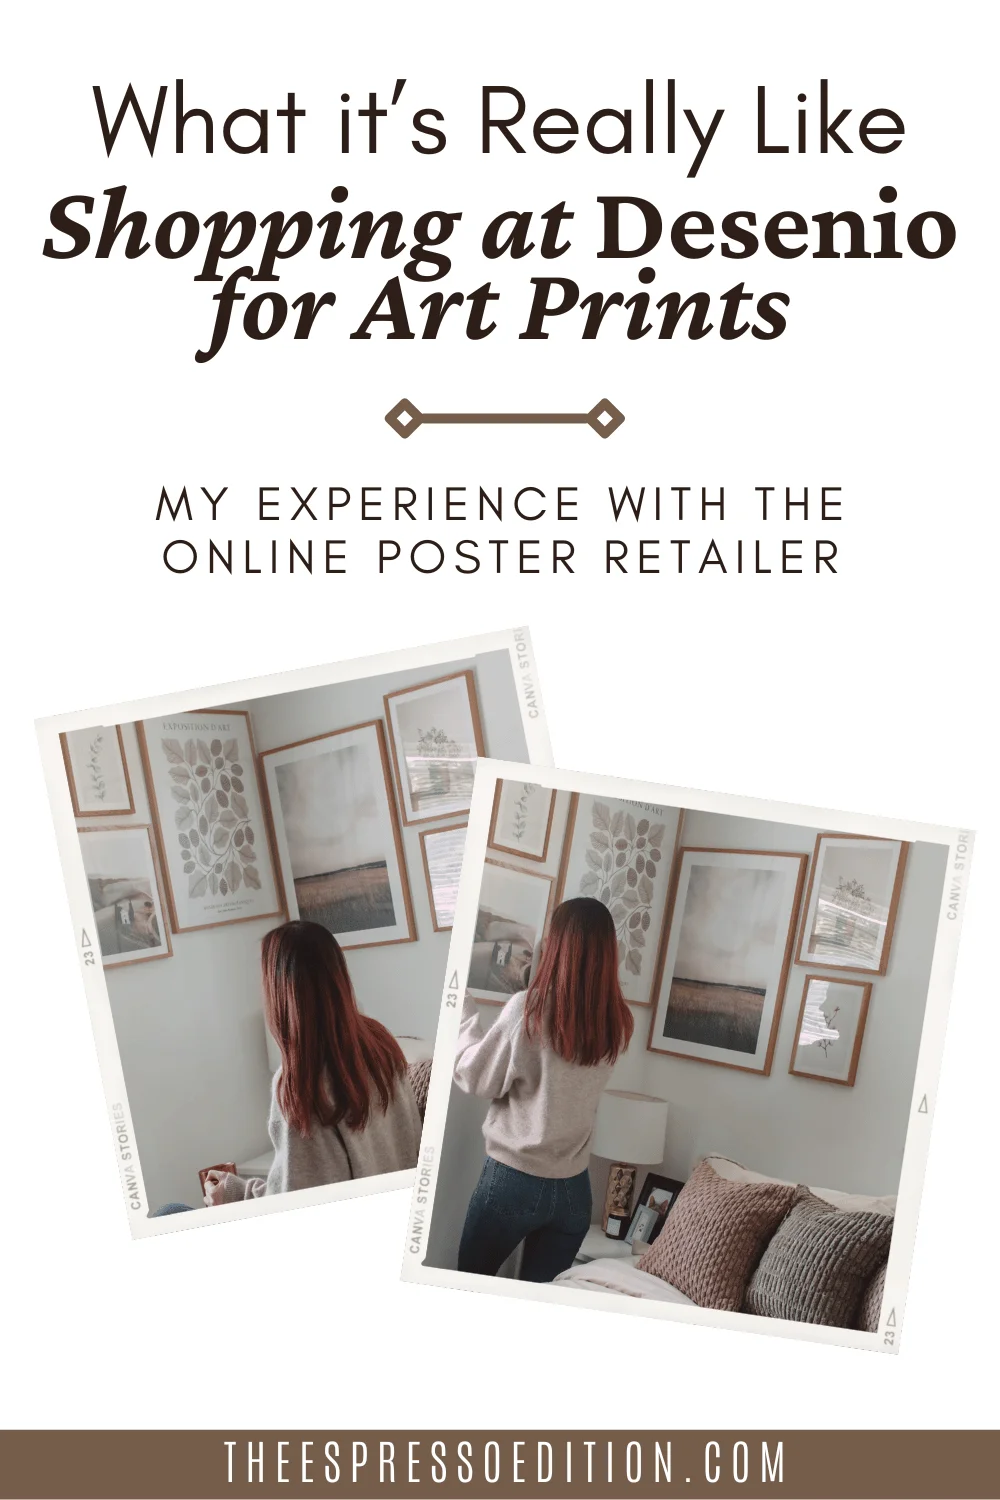 What It's Really Like to Shop at Desenio for Art Prints by The Espresso Edition cozy book and lifestyle blog